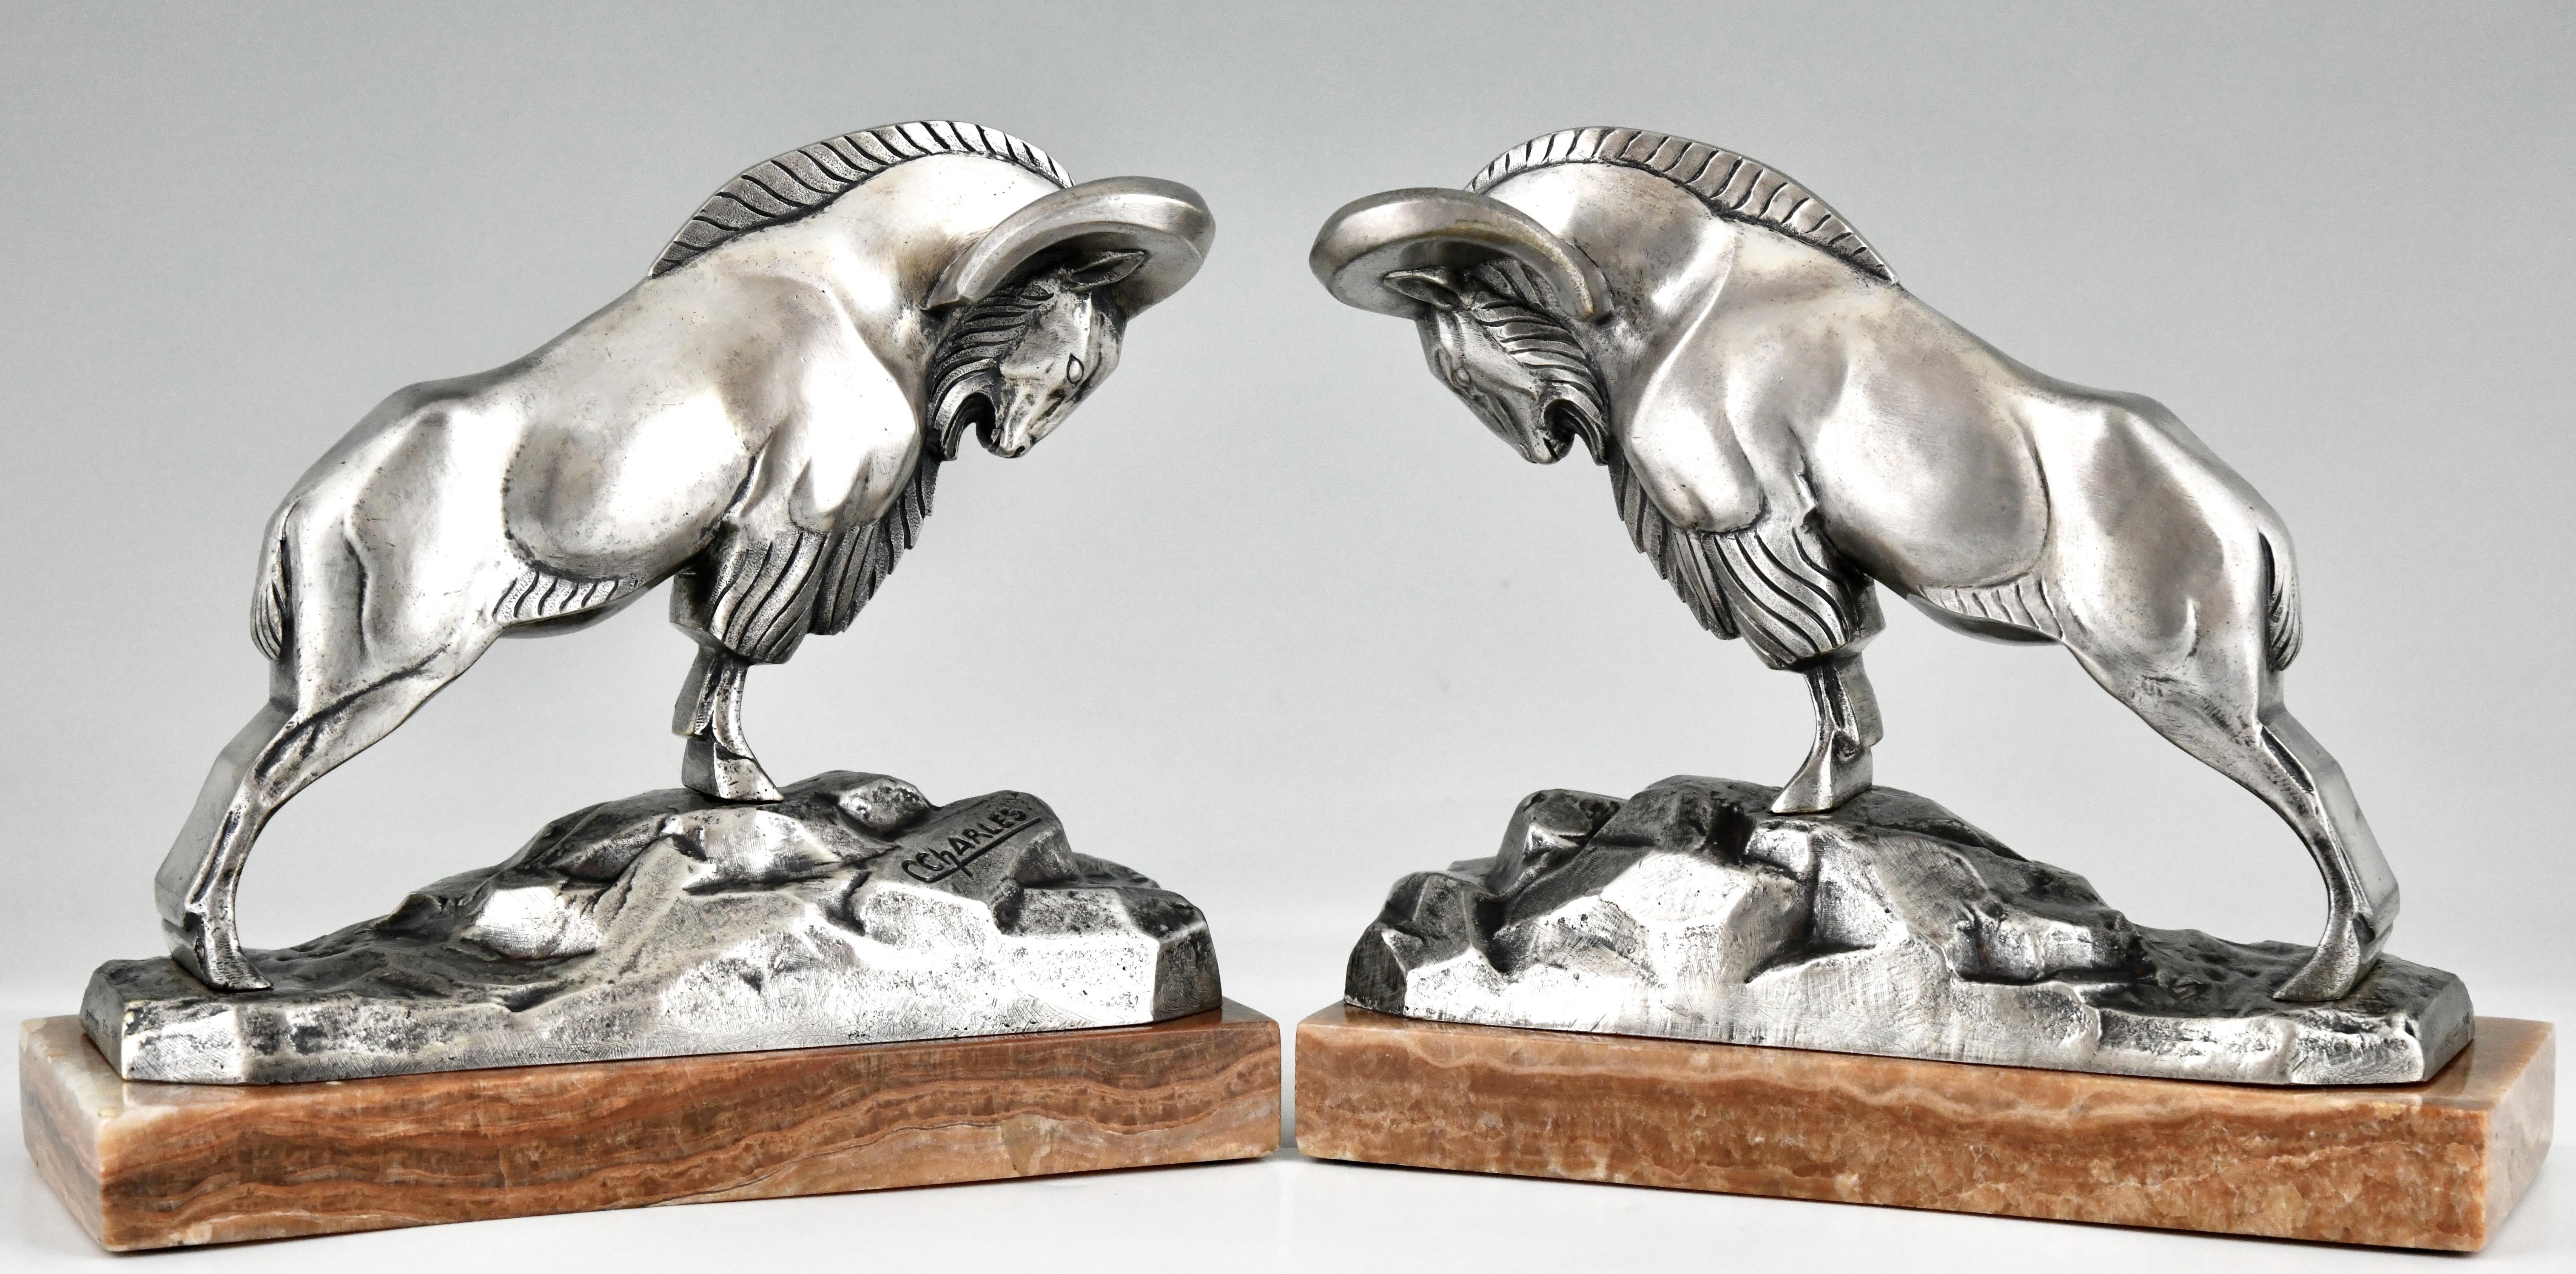 Art Deco silvered bronze ibex bookends signed by C. Charles.
With Patrouilleau foundry mark. 
Silvered bronze on a marble base. 
France 1925. 

Literature:
The dictionary of sculptors in bronze, James Mackay. Antique collectors club.
Dictionnaire